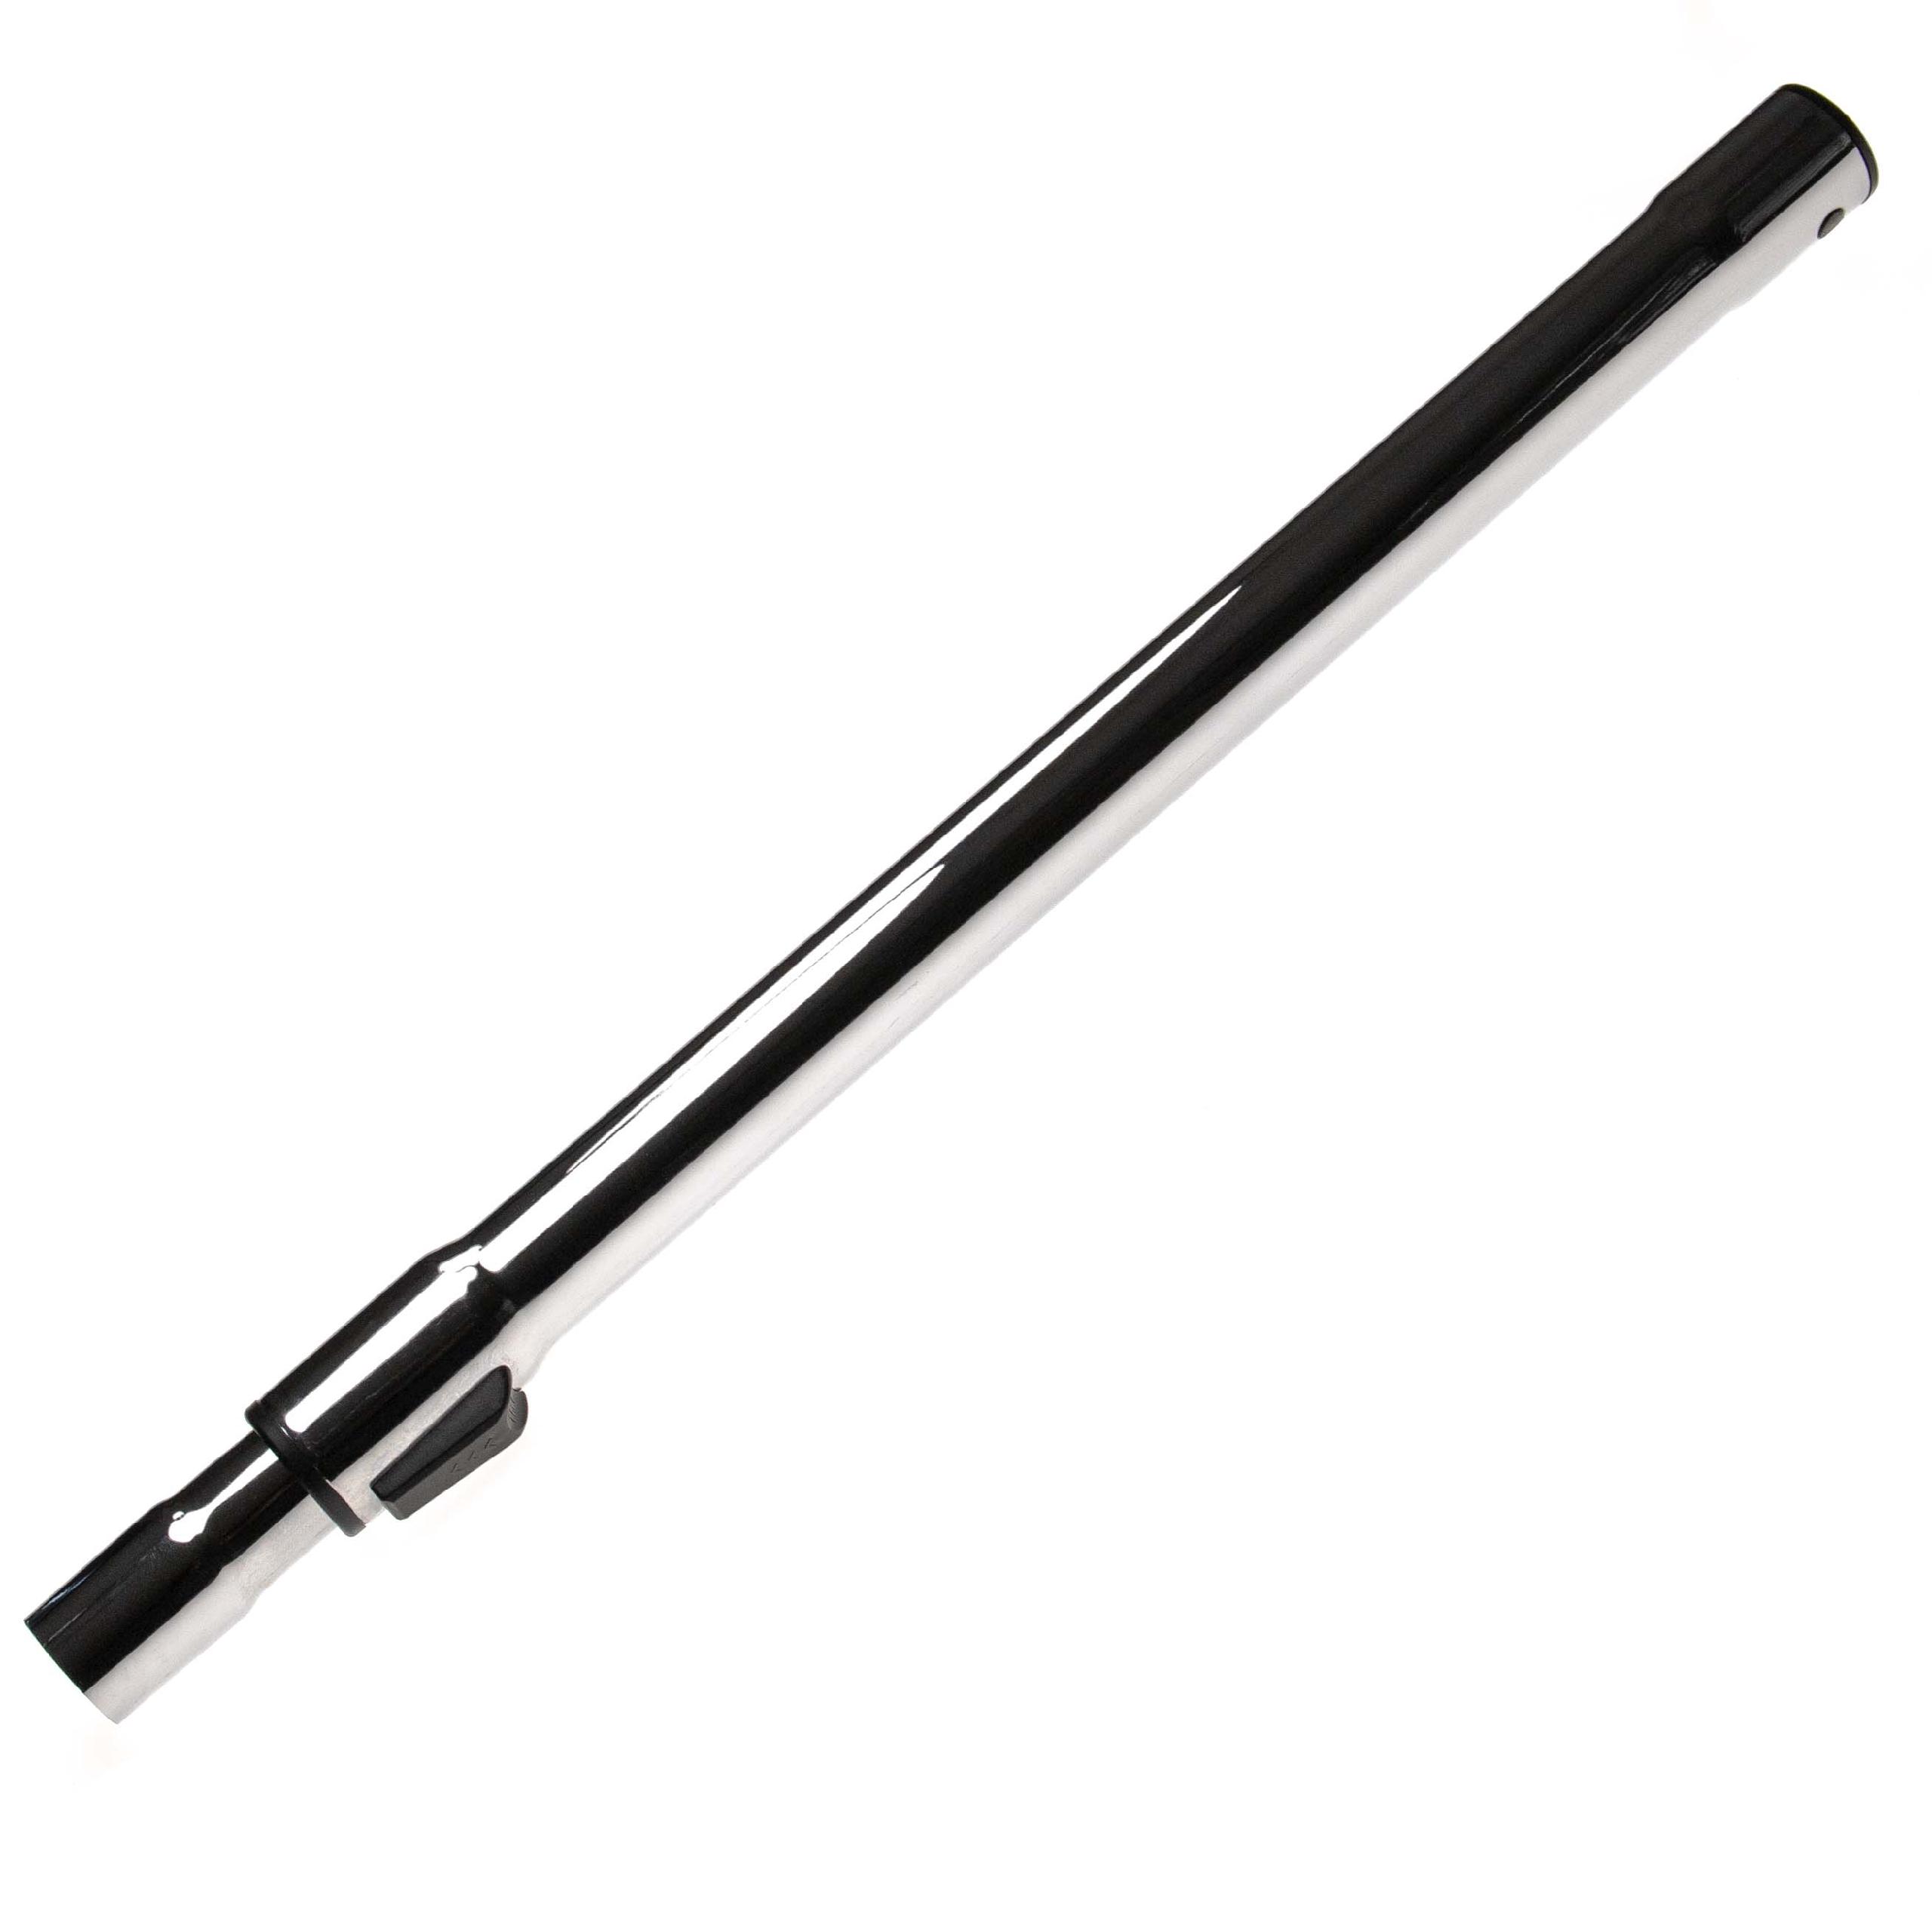 Tube as Replacement for Kärcher 2.862-008.0 for Kärcher Vacuum Cleaner - Length: 60 - 97 cm, black / silver